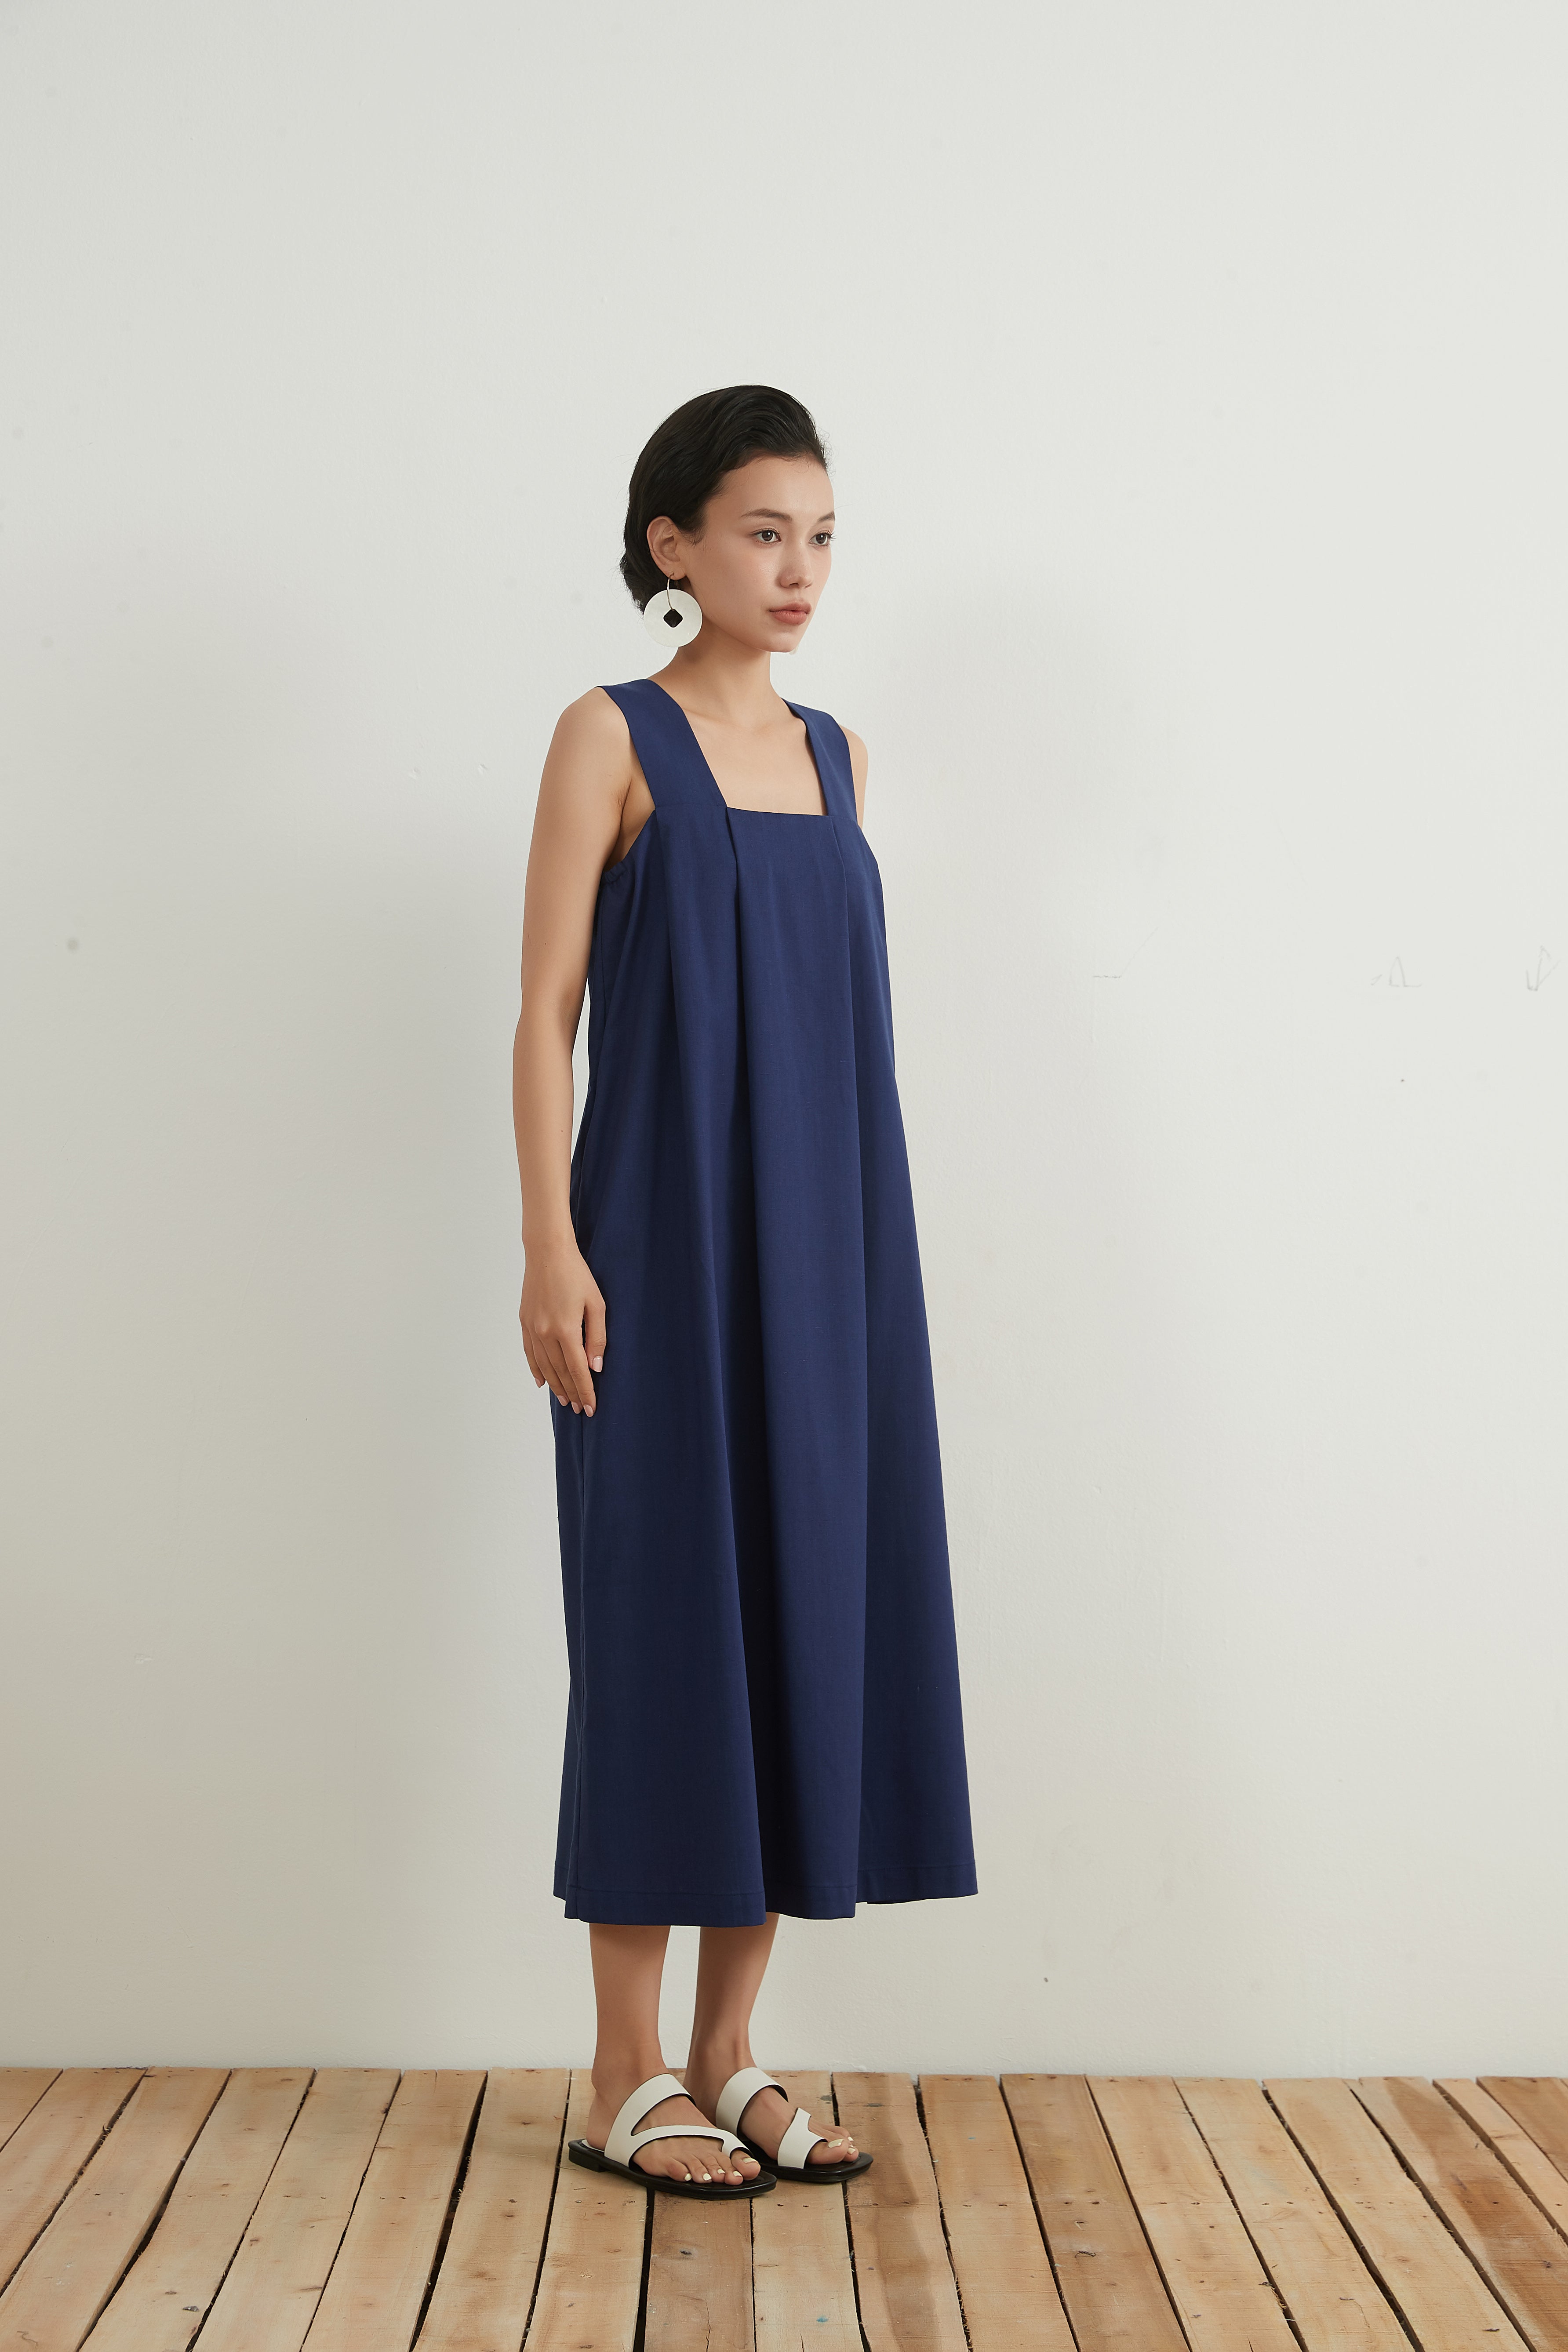 Dress – On One's Own official